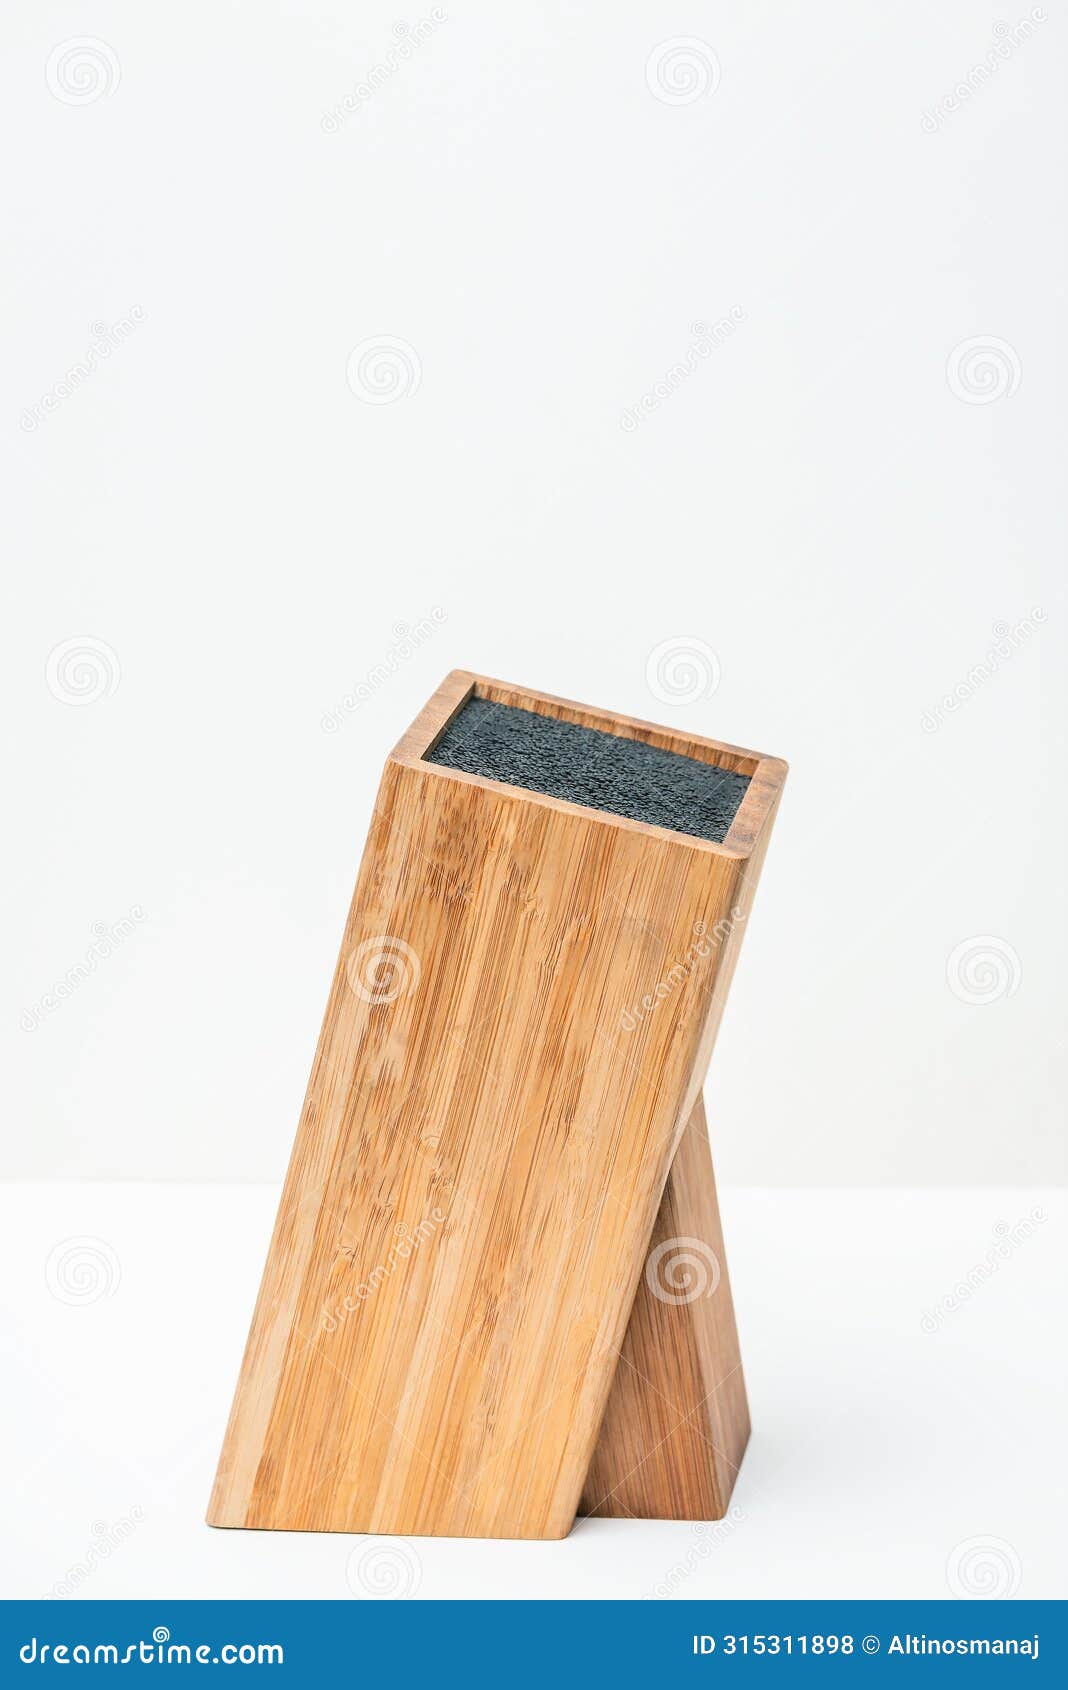 knife block bamboo  single one no knives on it